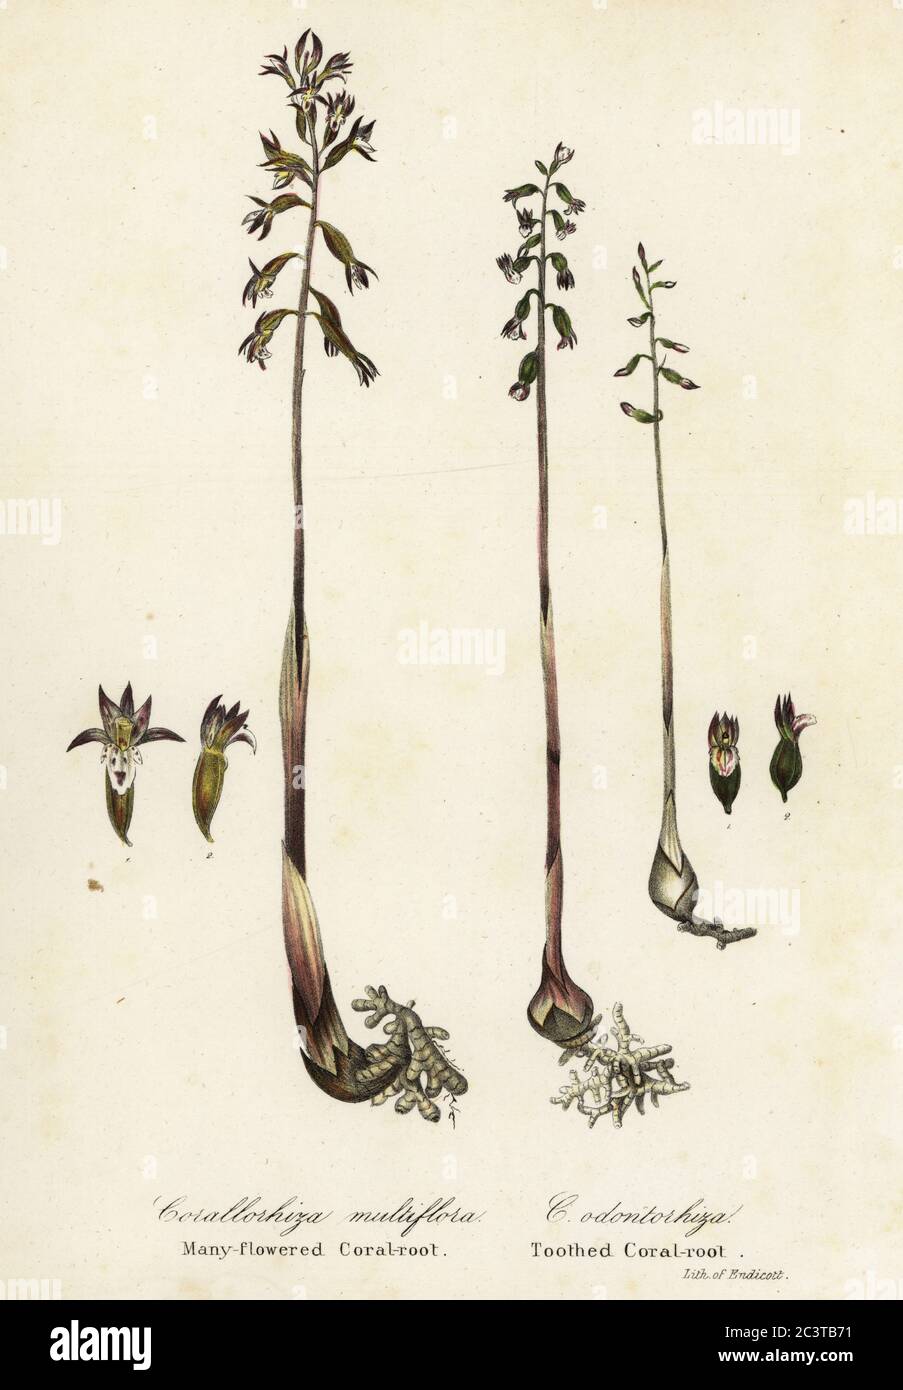 Spotted coralroot, Corallorhiza maculata, and fall coral-root, Corallorhiza odontorhiza (Many-flowered coralroot, Corallorhiza multiflora, and toothed coral-root, C. odontorhiza). Handcoloured lithograph by Endicott after a botanical illustration from John Torrey’s A Flora of the State of New York, Carroll and Cook, Albany, 1843. The plates drawn by John Torrey, Agnes Mitchell, Elizabeth Paoley and Swinton. John Torrey was an American botanist, chemist and physician 1796-1873. Stock Photo